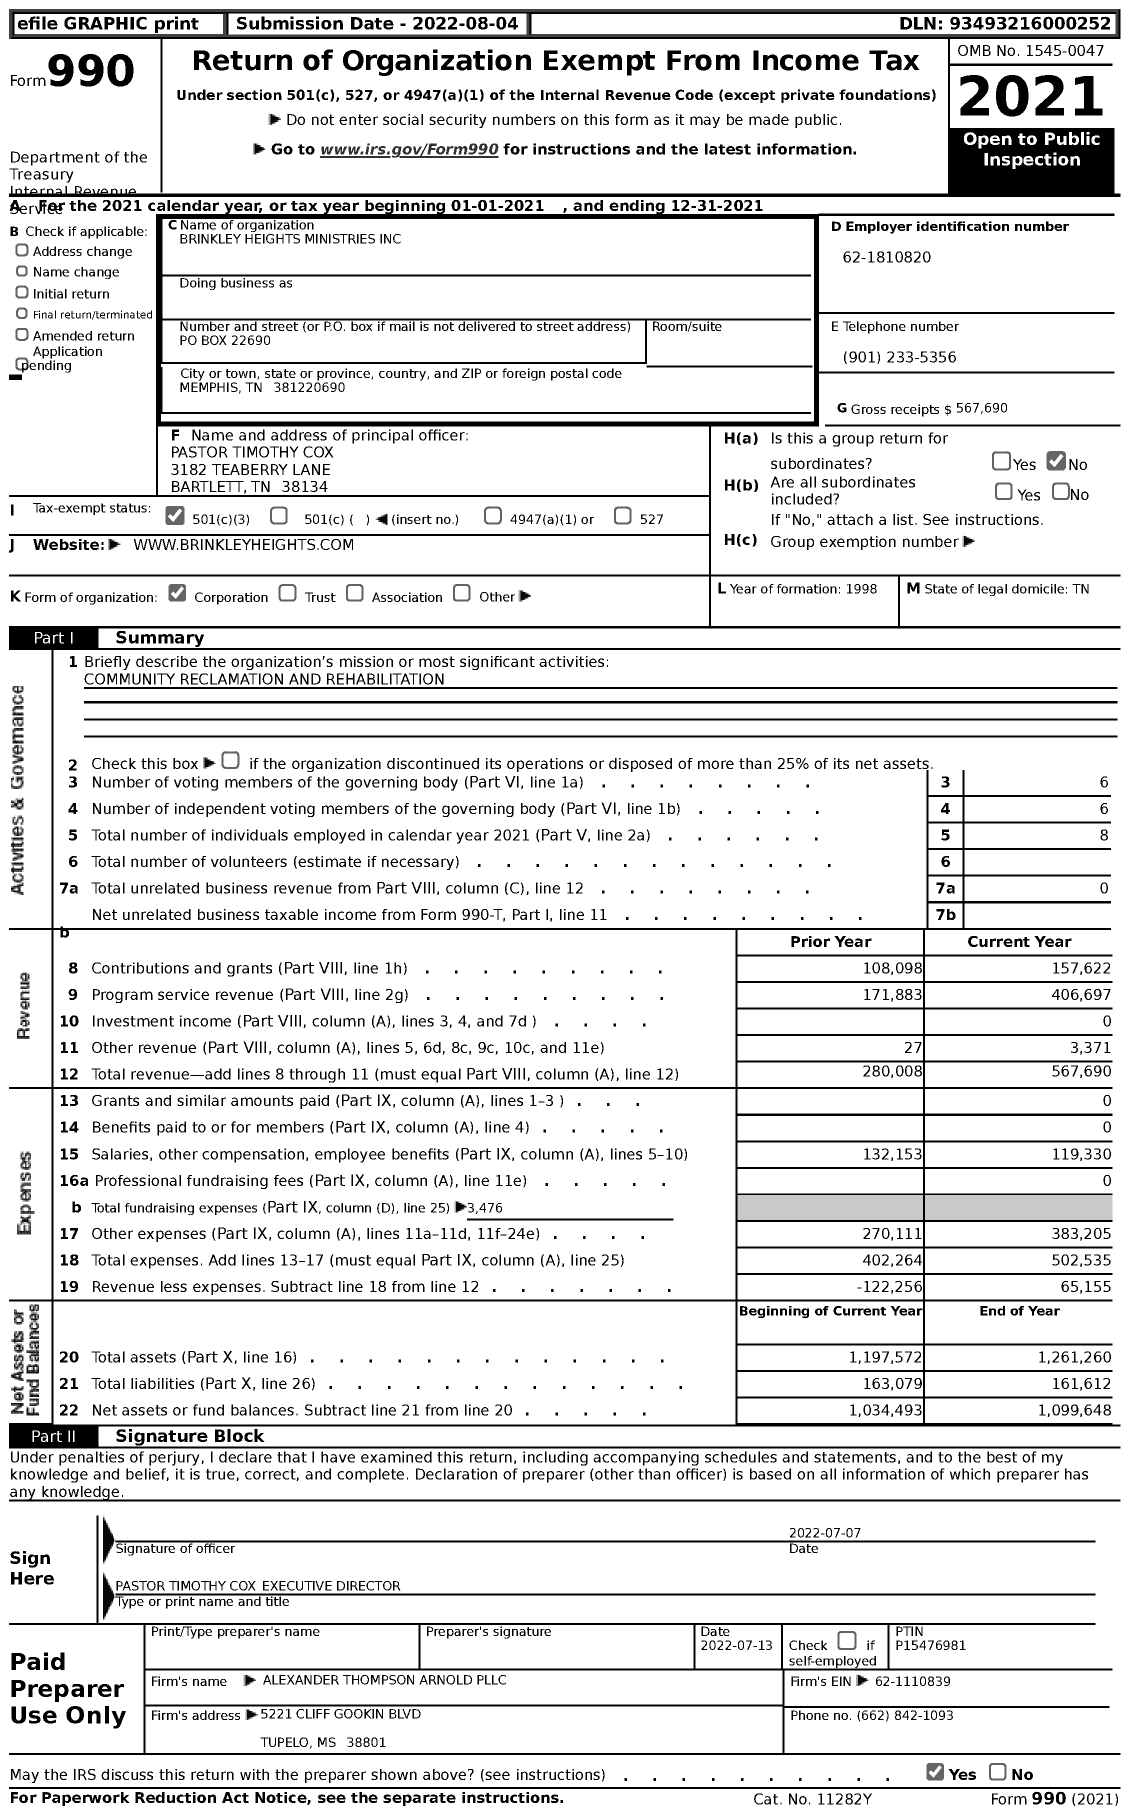 Image of first page of 2021 Form 990 for Brinkley Heights Ministries